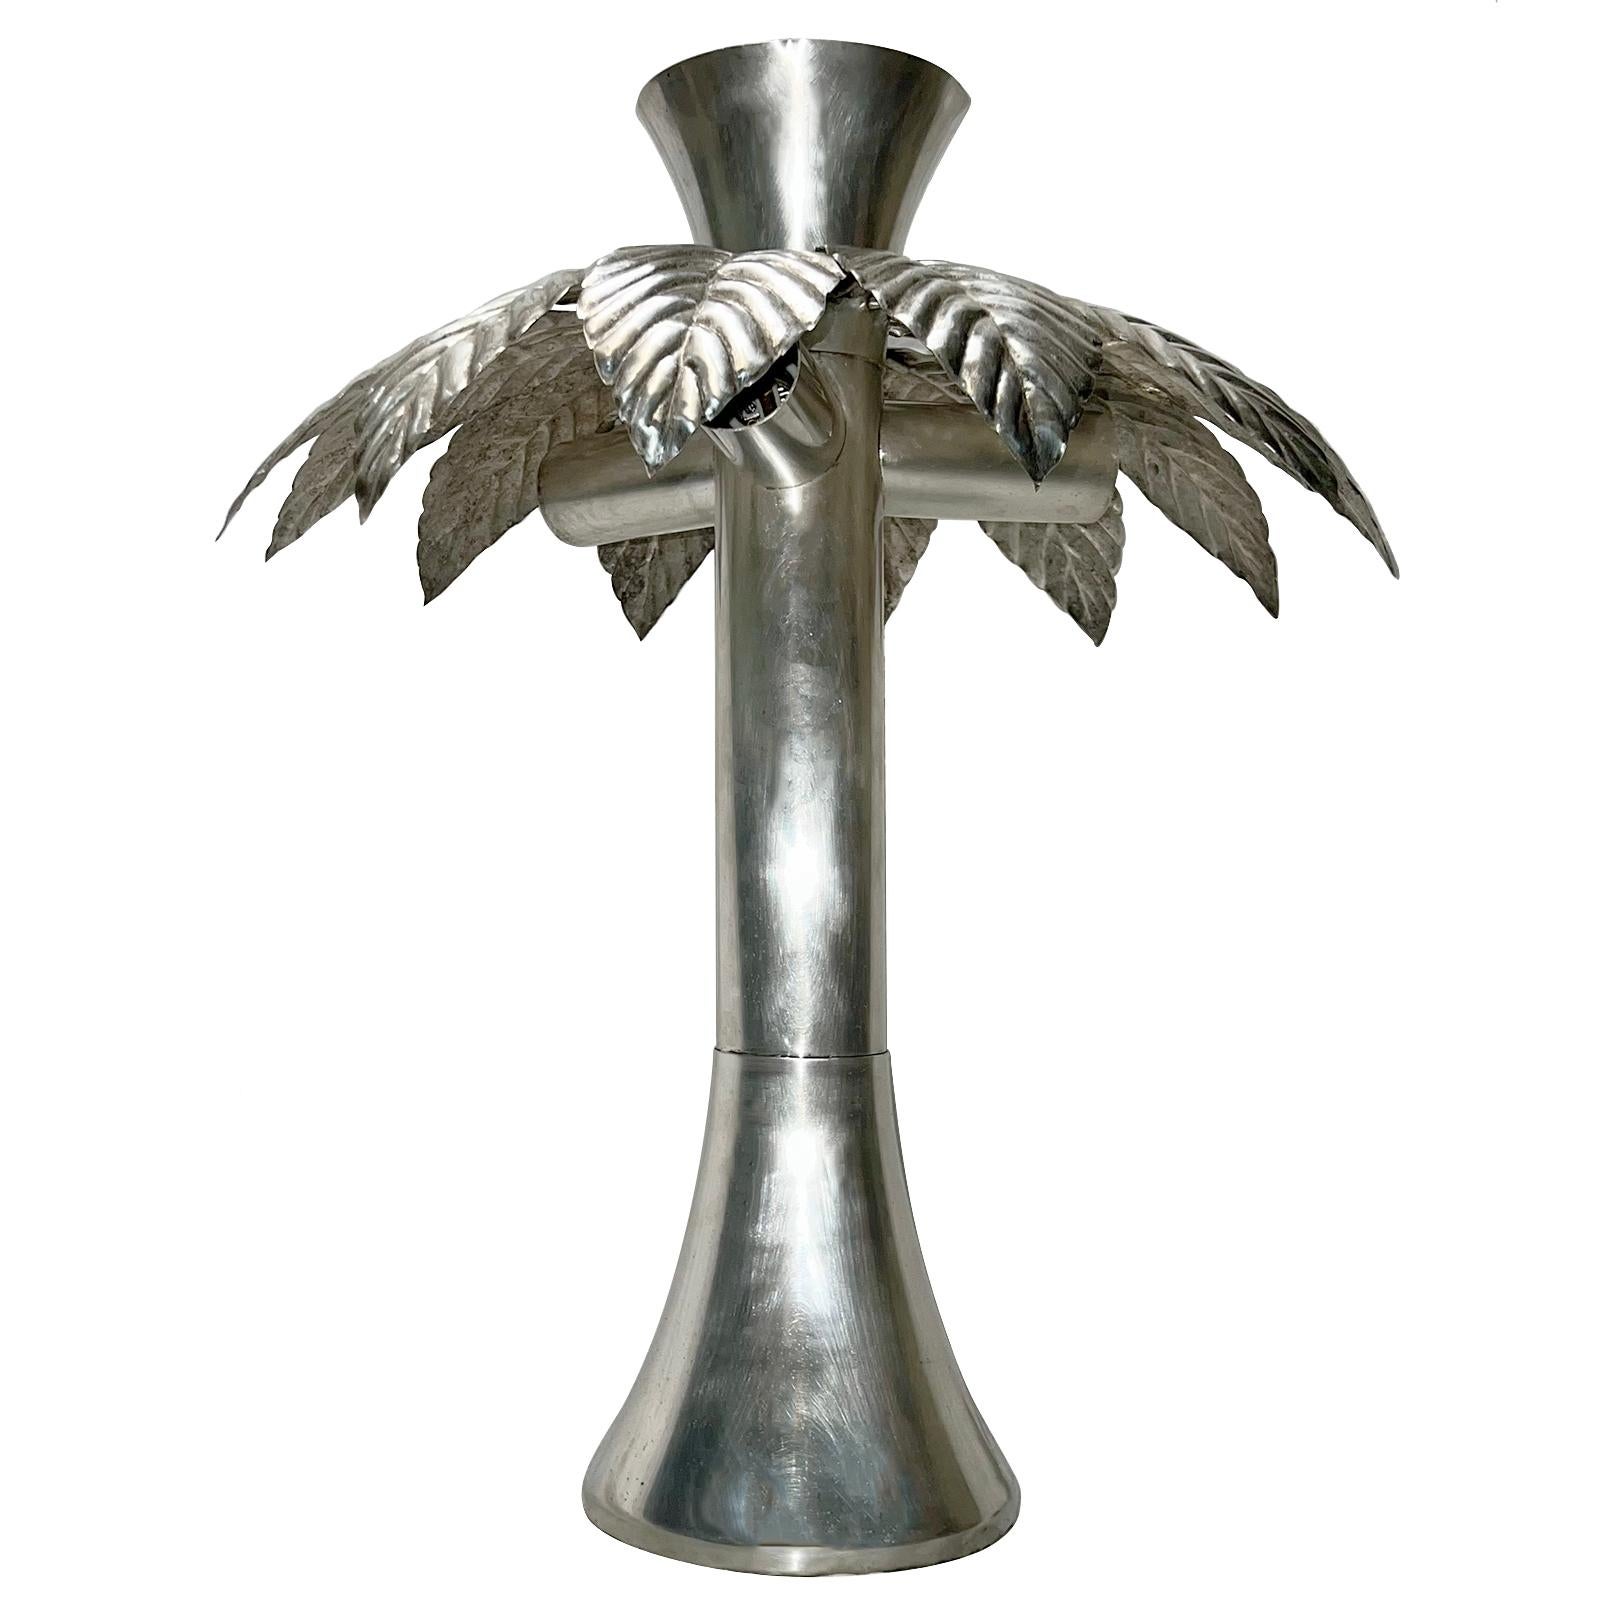 A circa 1950's French hammered tole palm tree table lamp wiht orignal patina.

Measurements:
Height: 25.75